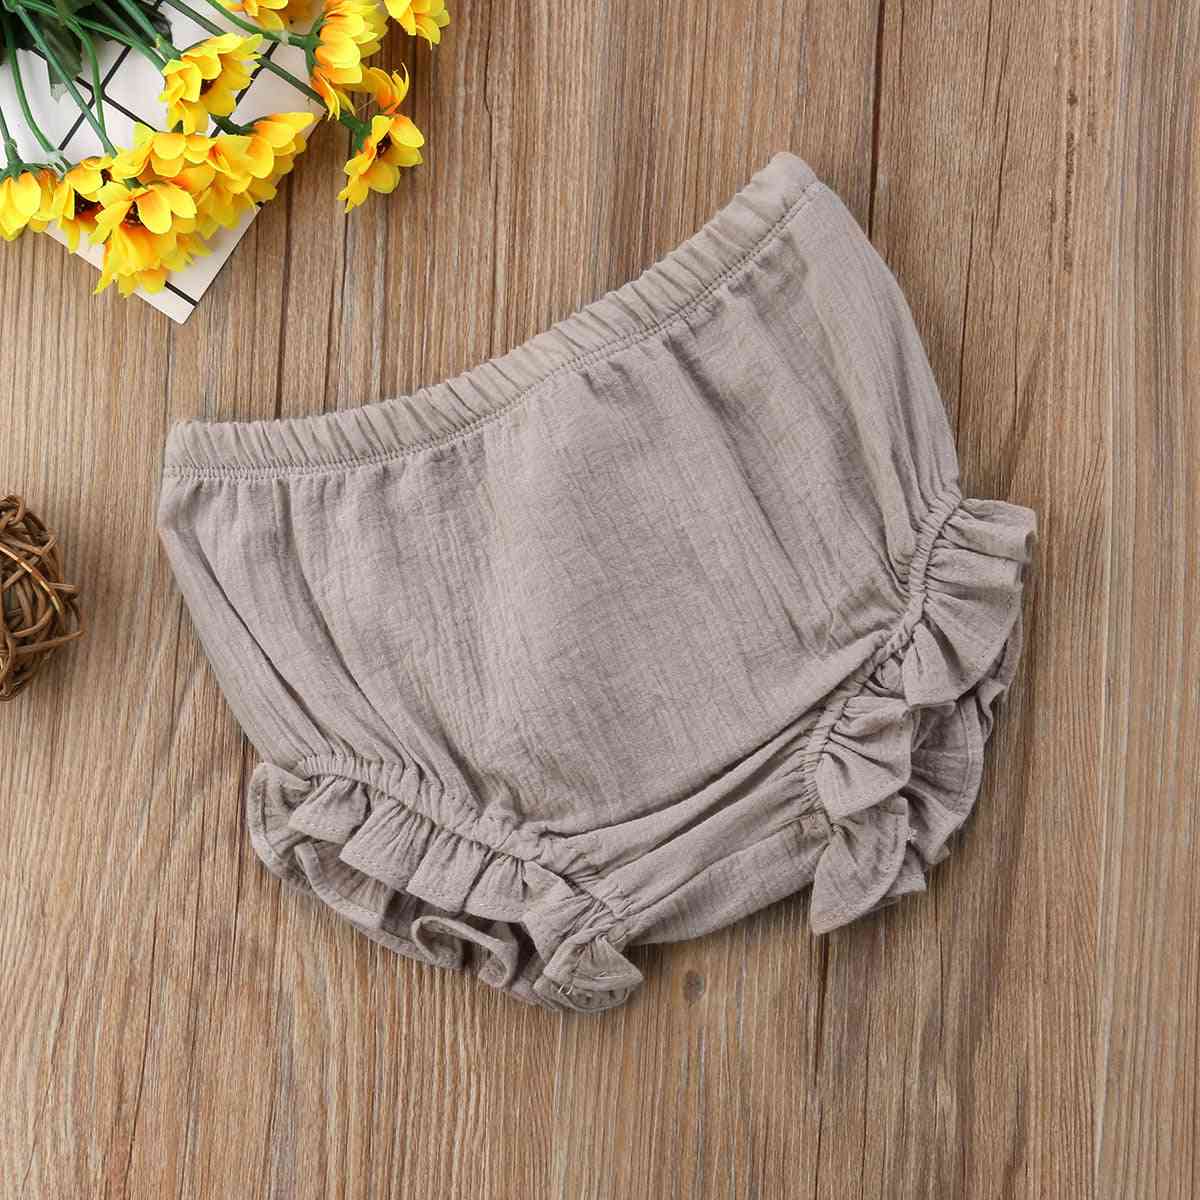 Toddler Infant Baby Kids Ruffles Shorts Bottoms Solid Pp Bloomers Cotton Nappy Diaper Covers